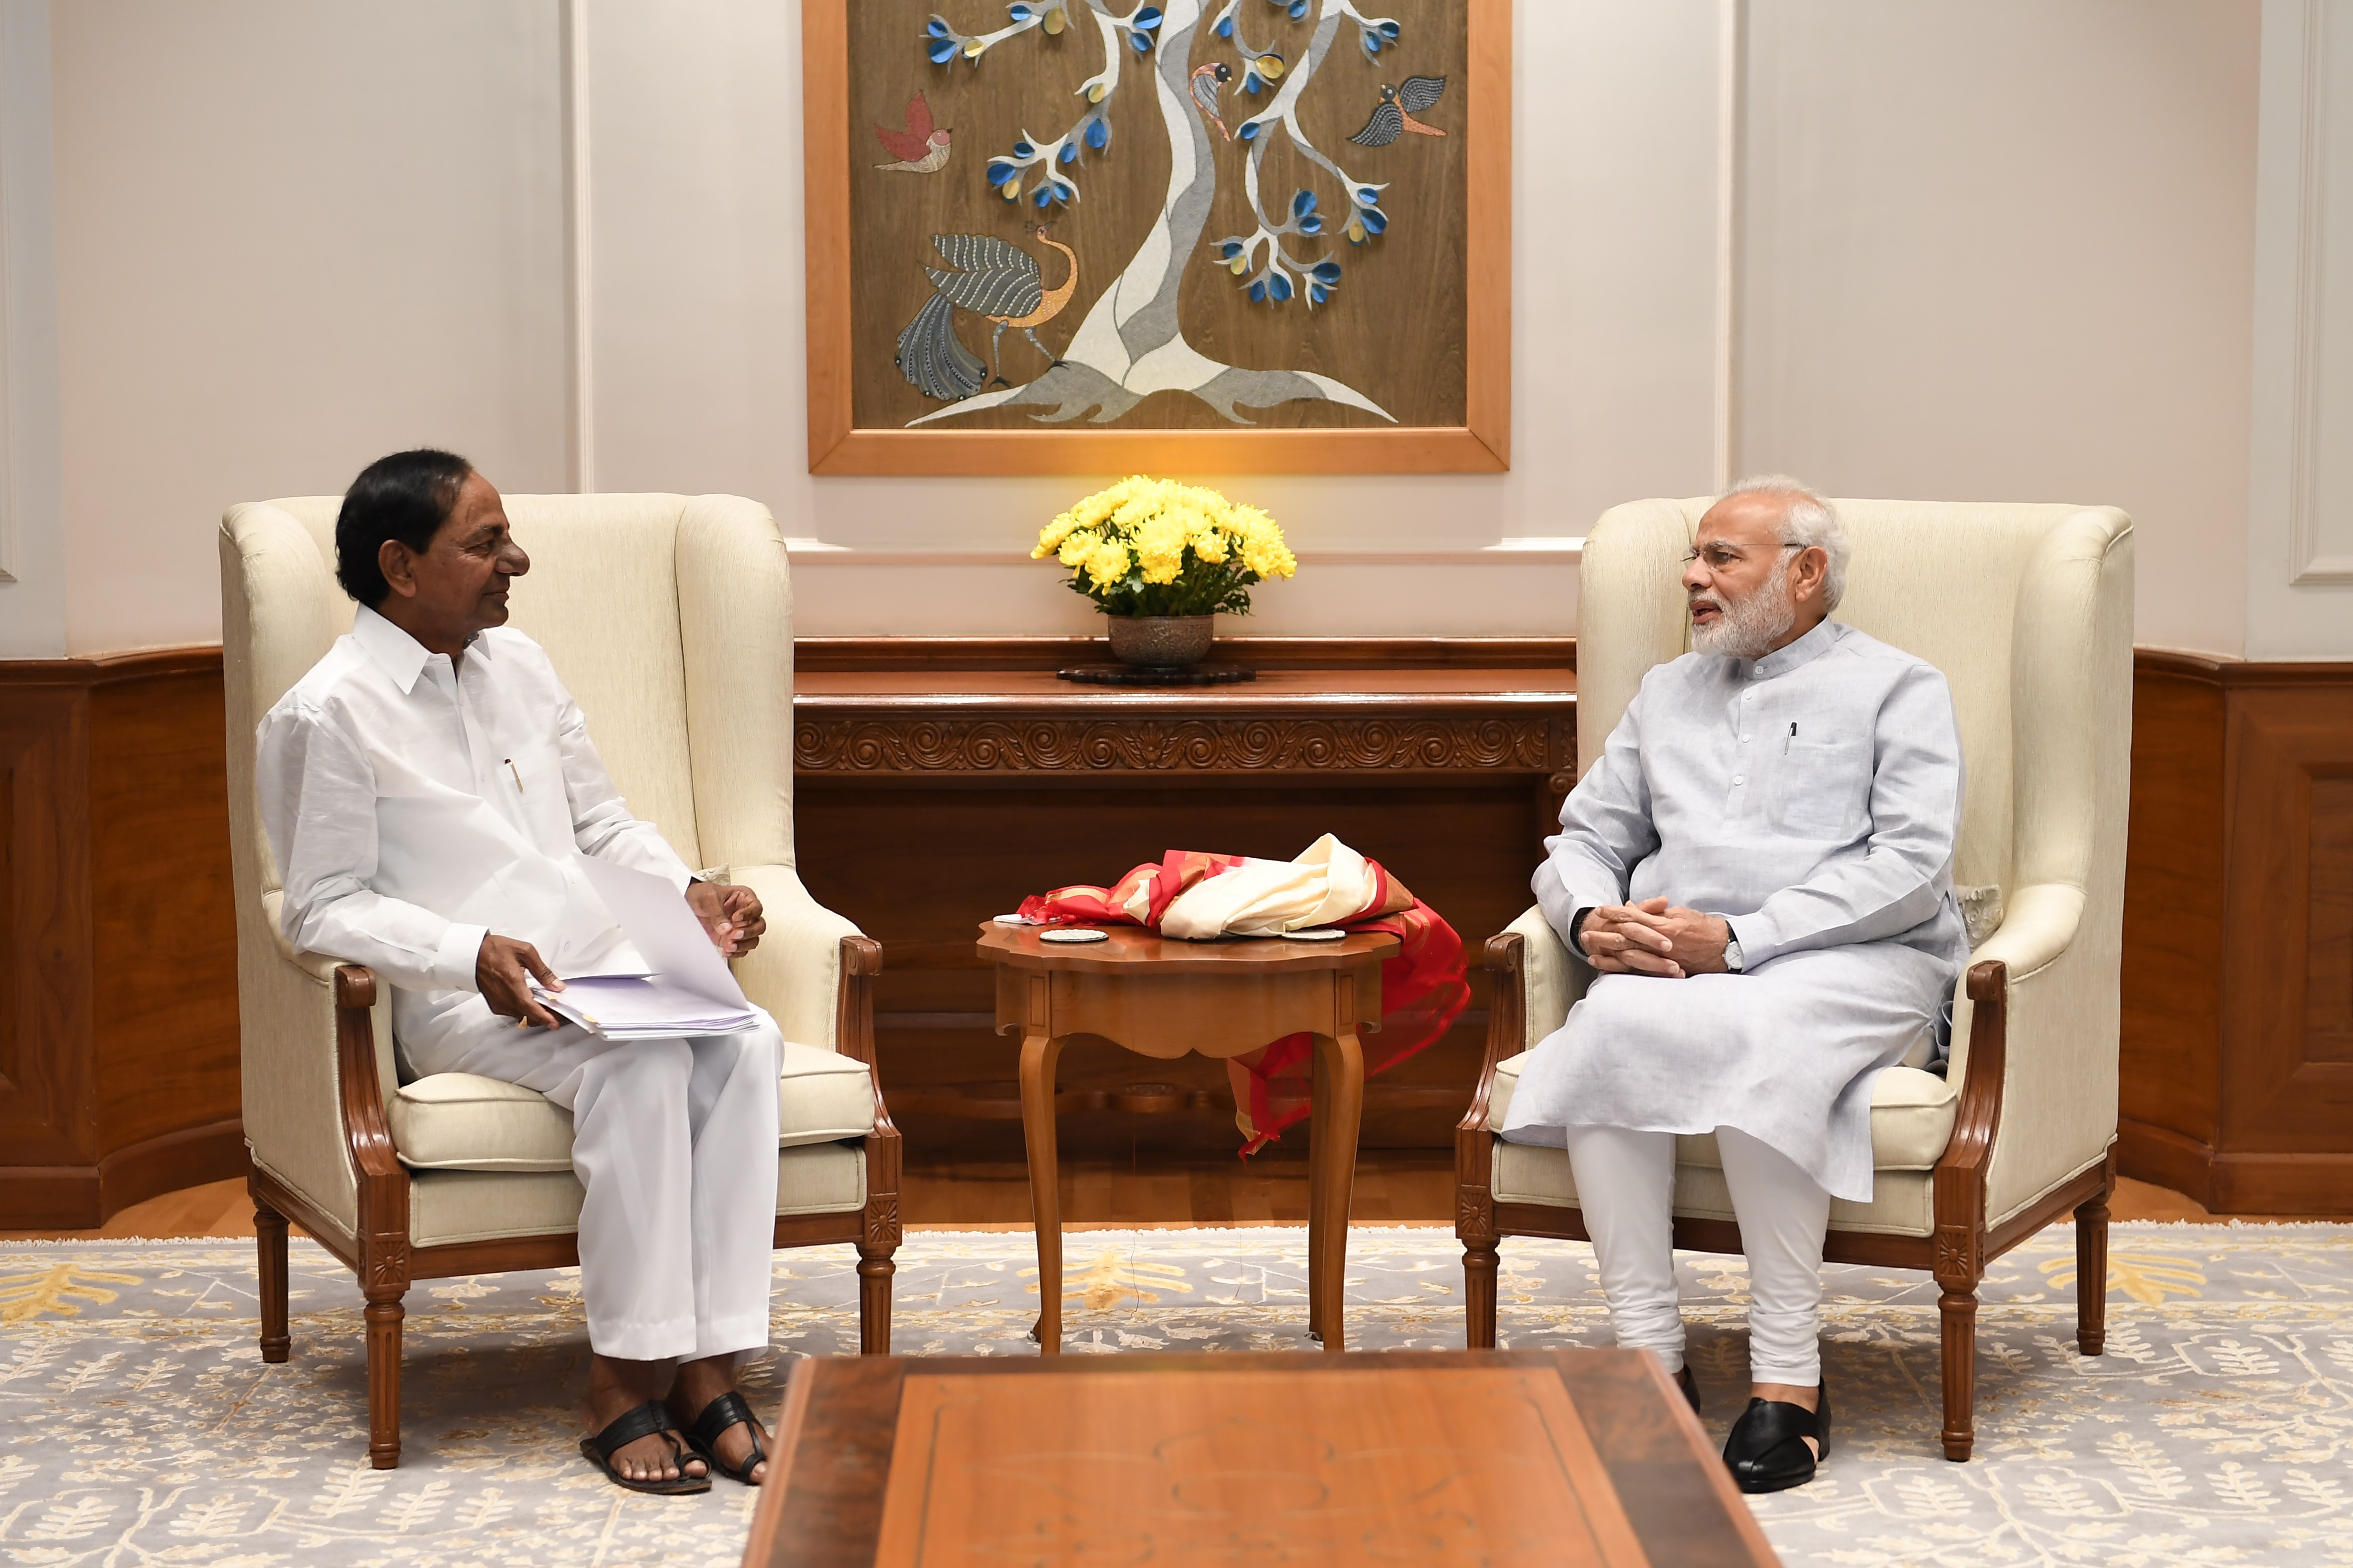 Telangana Chief Minister KCR had an hour-long meeting with PM Modi in New Delhi